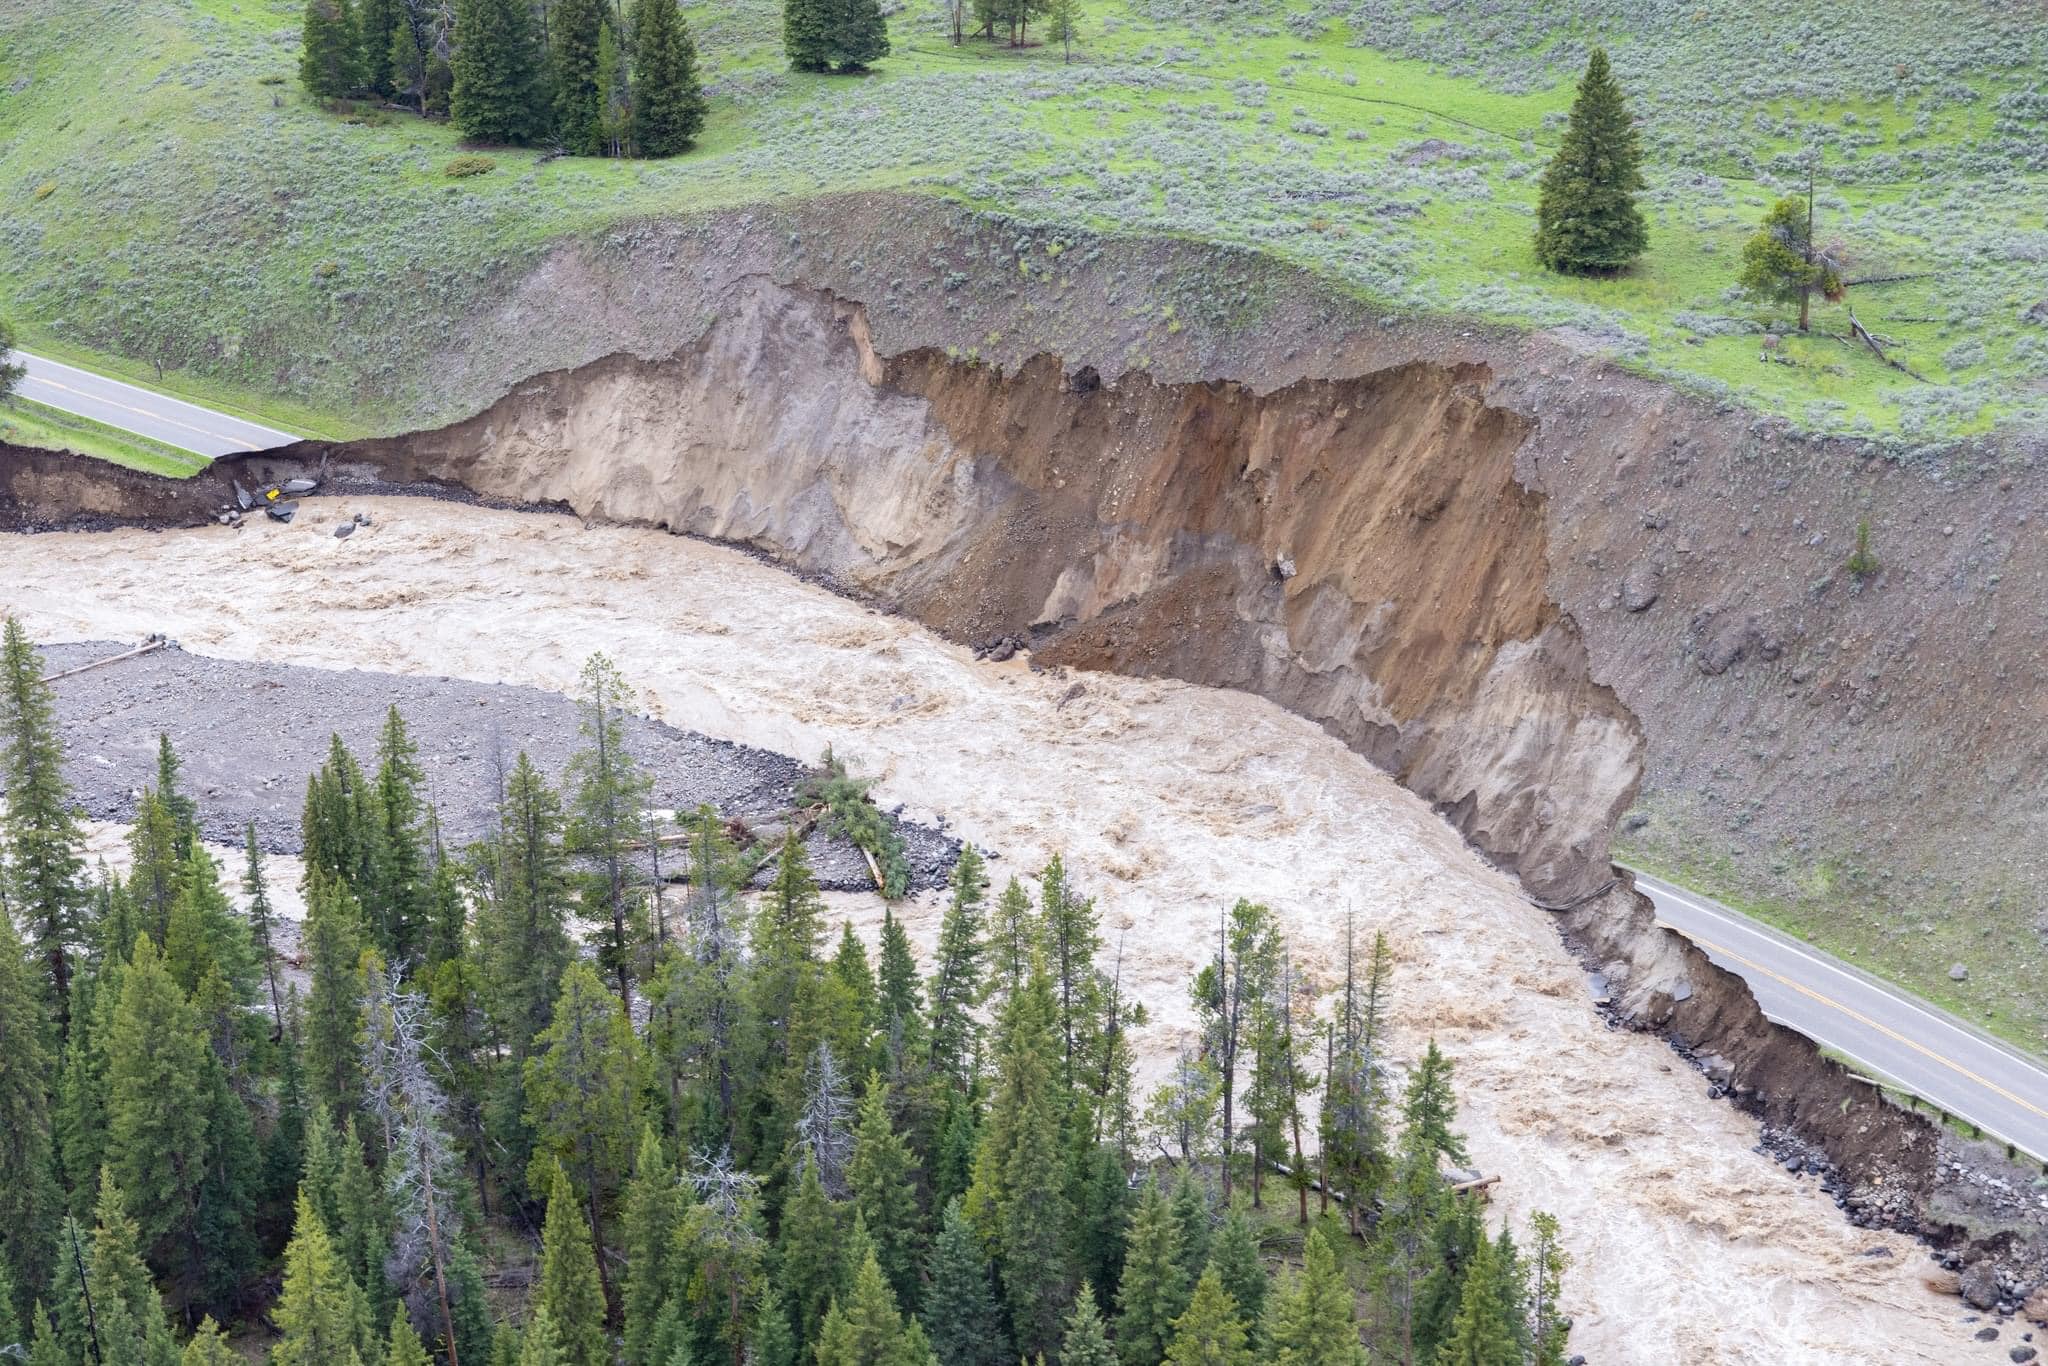 Limited Yellowstone Reopening Set for Wednesday